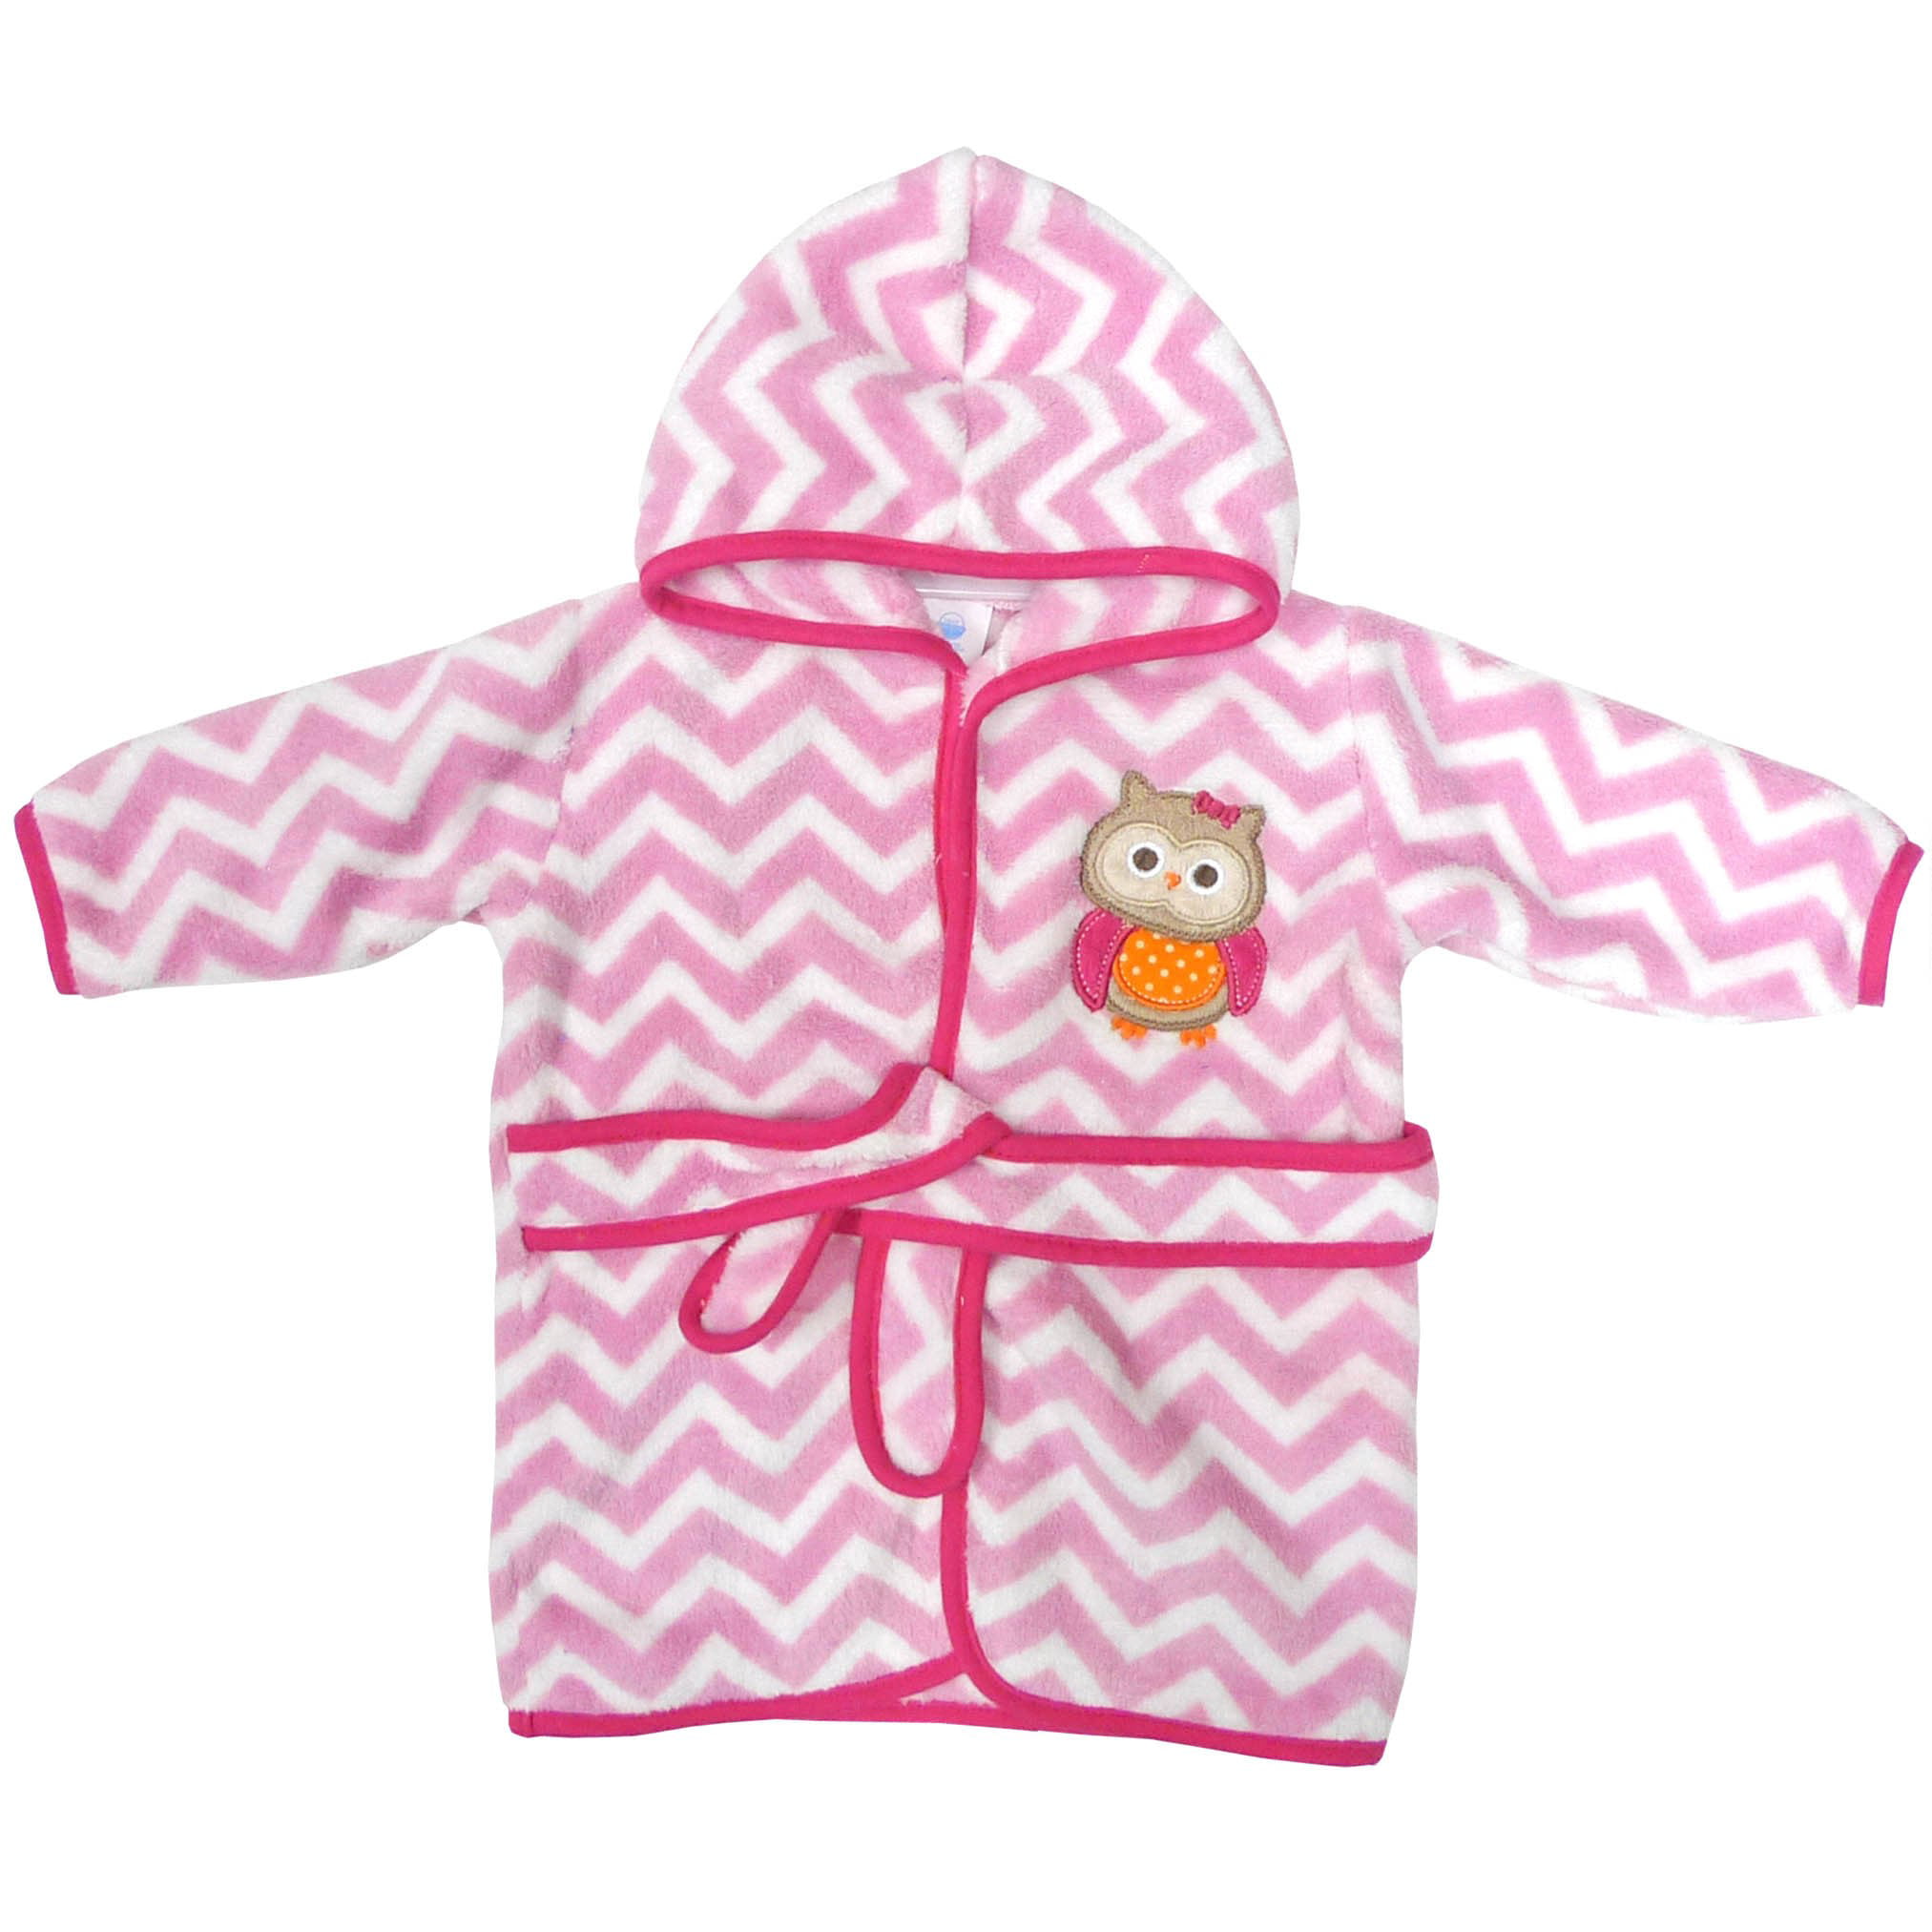 Neat Solutions Infant Hooded Bath Robe Unicorn Pink 